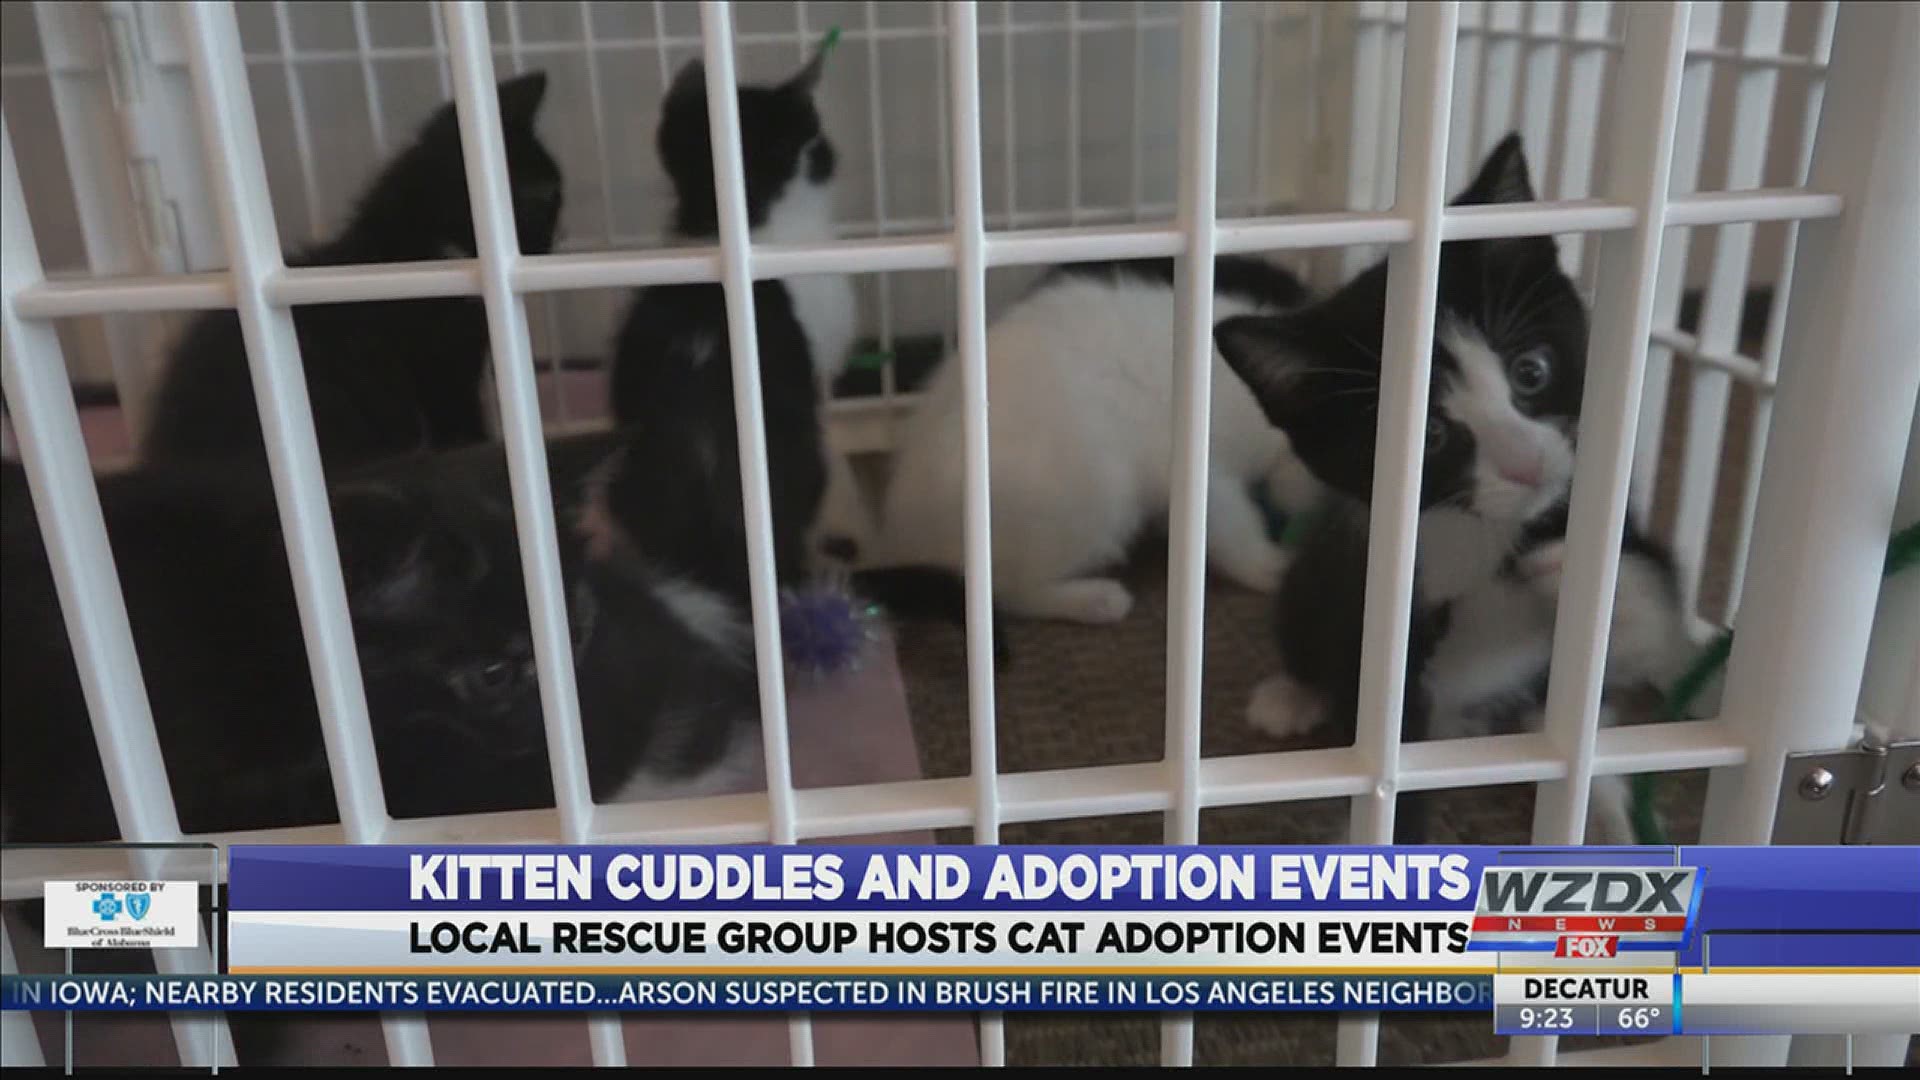 Local cat rescue group hosts adoption events around North Alabama. These events allow people to get in some cuddles while finding a forever home for these cats.